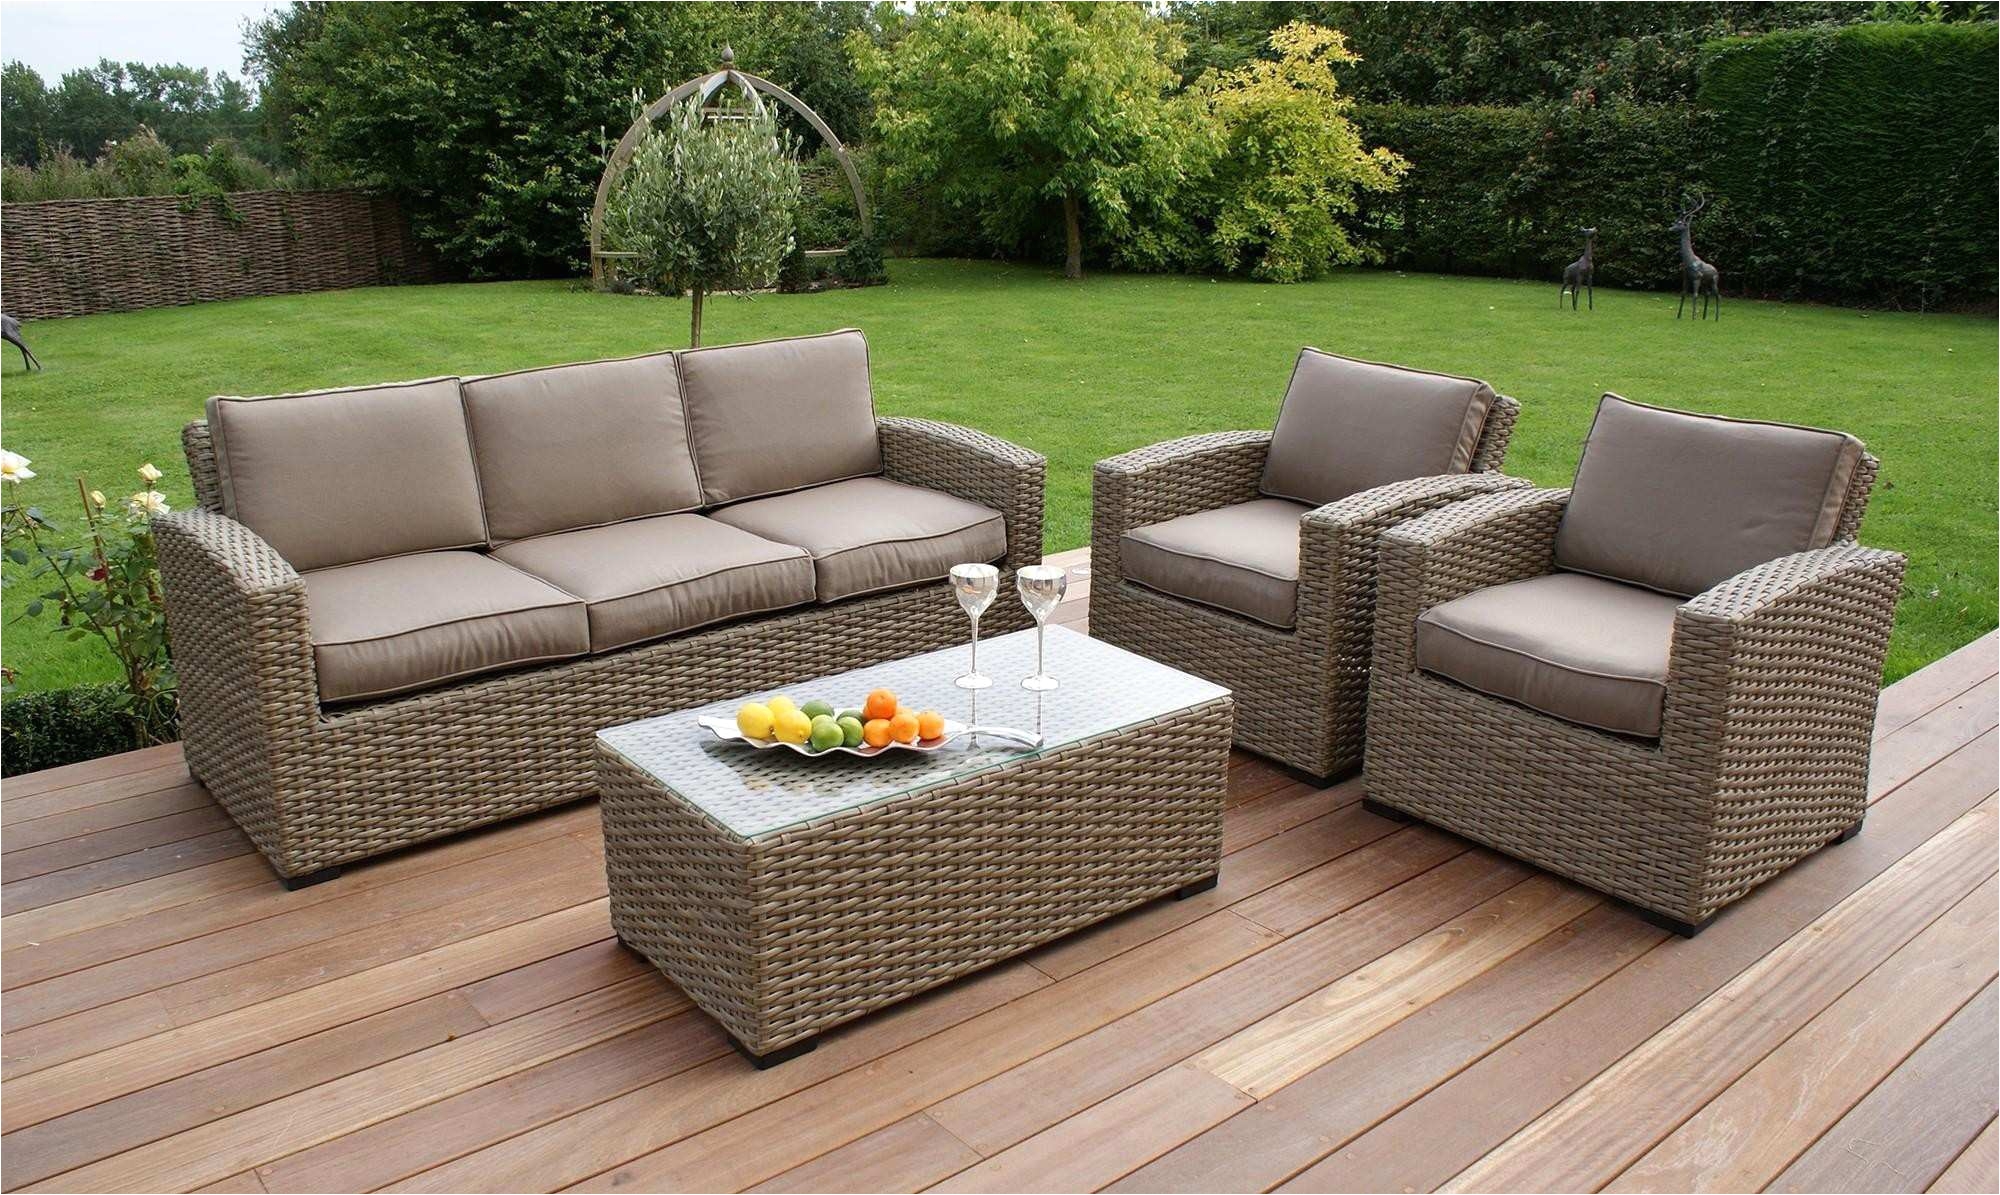 free patio furniture luxury buy used patio furniture awesome outdoor sofa 0d patio chairs sale